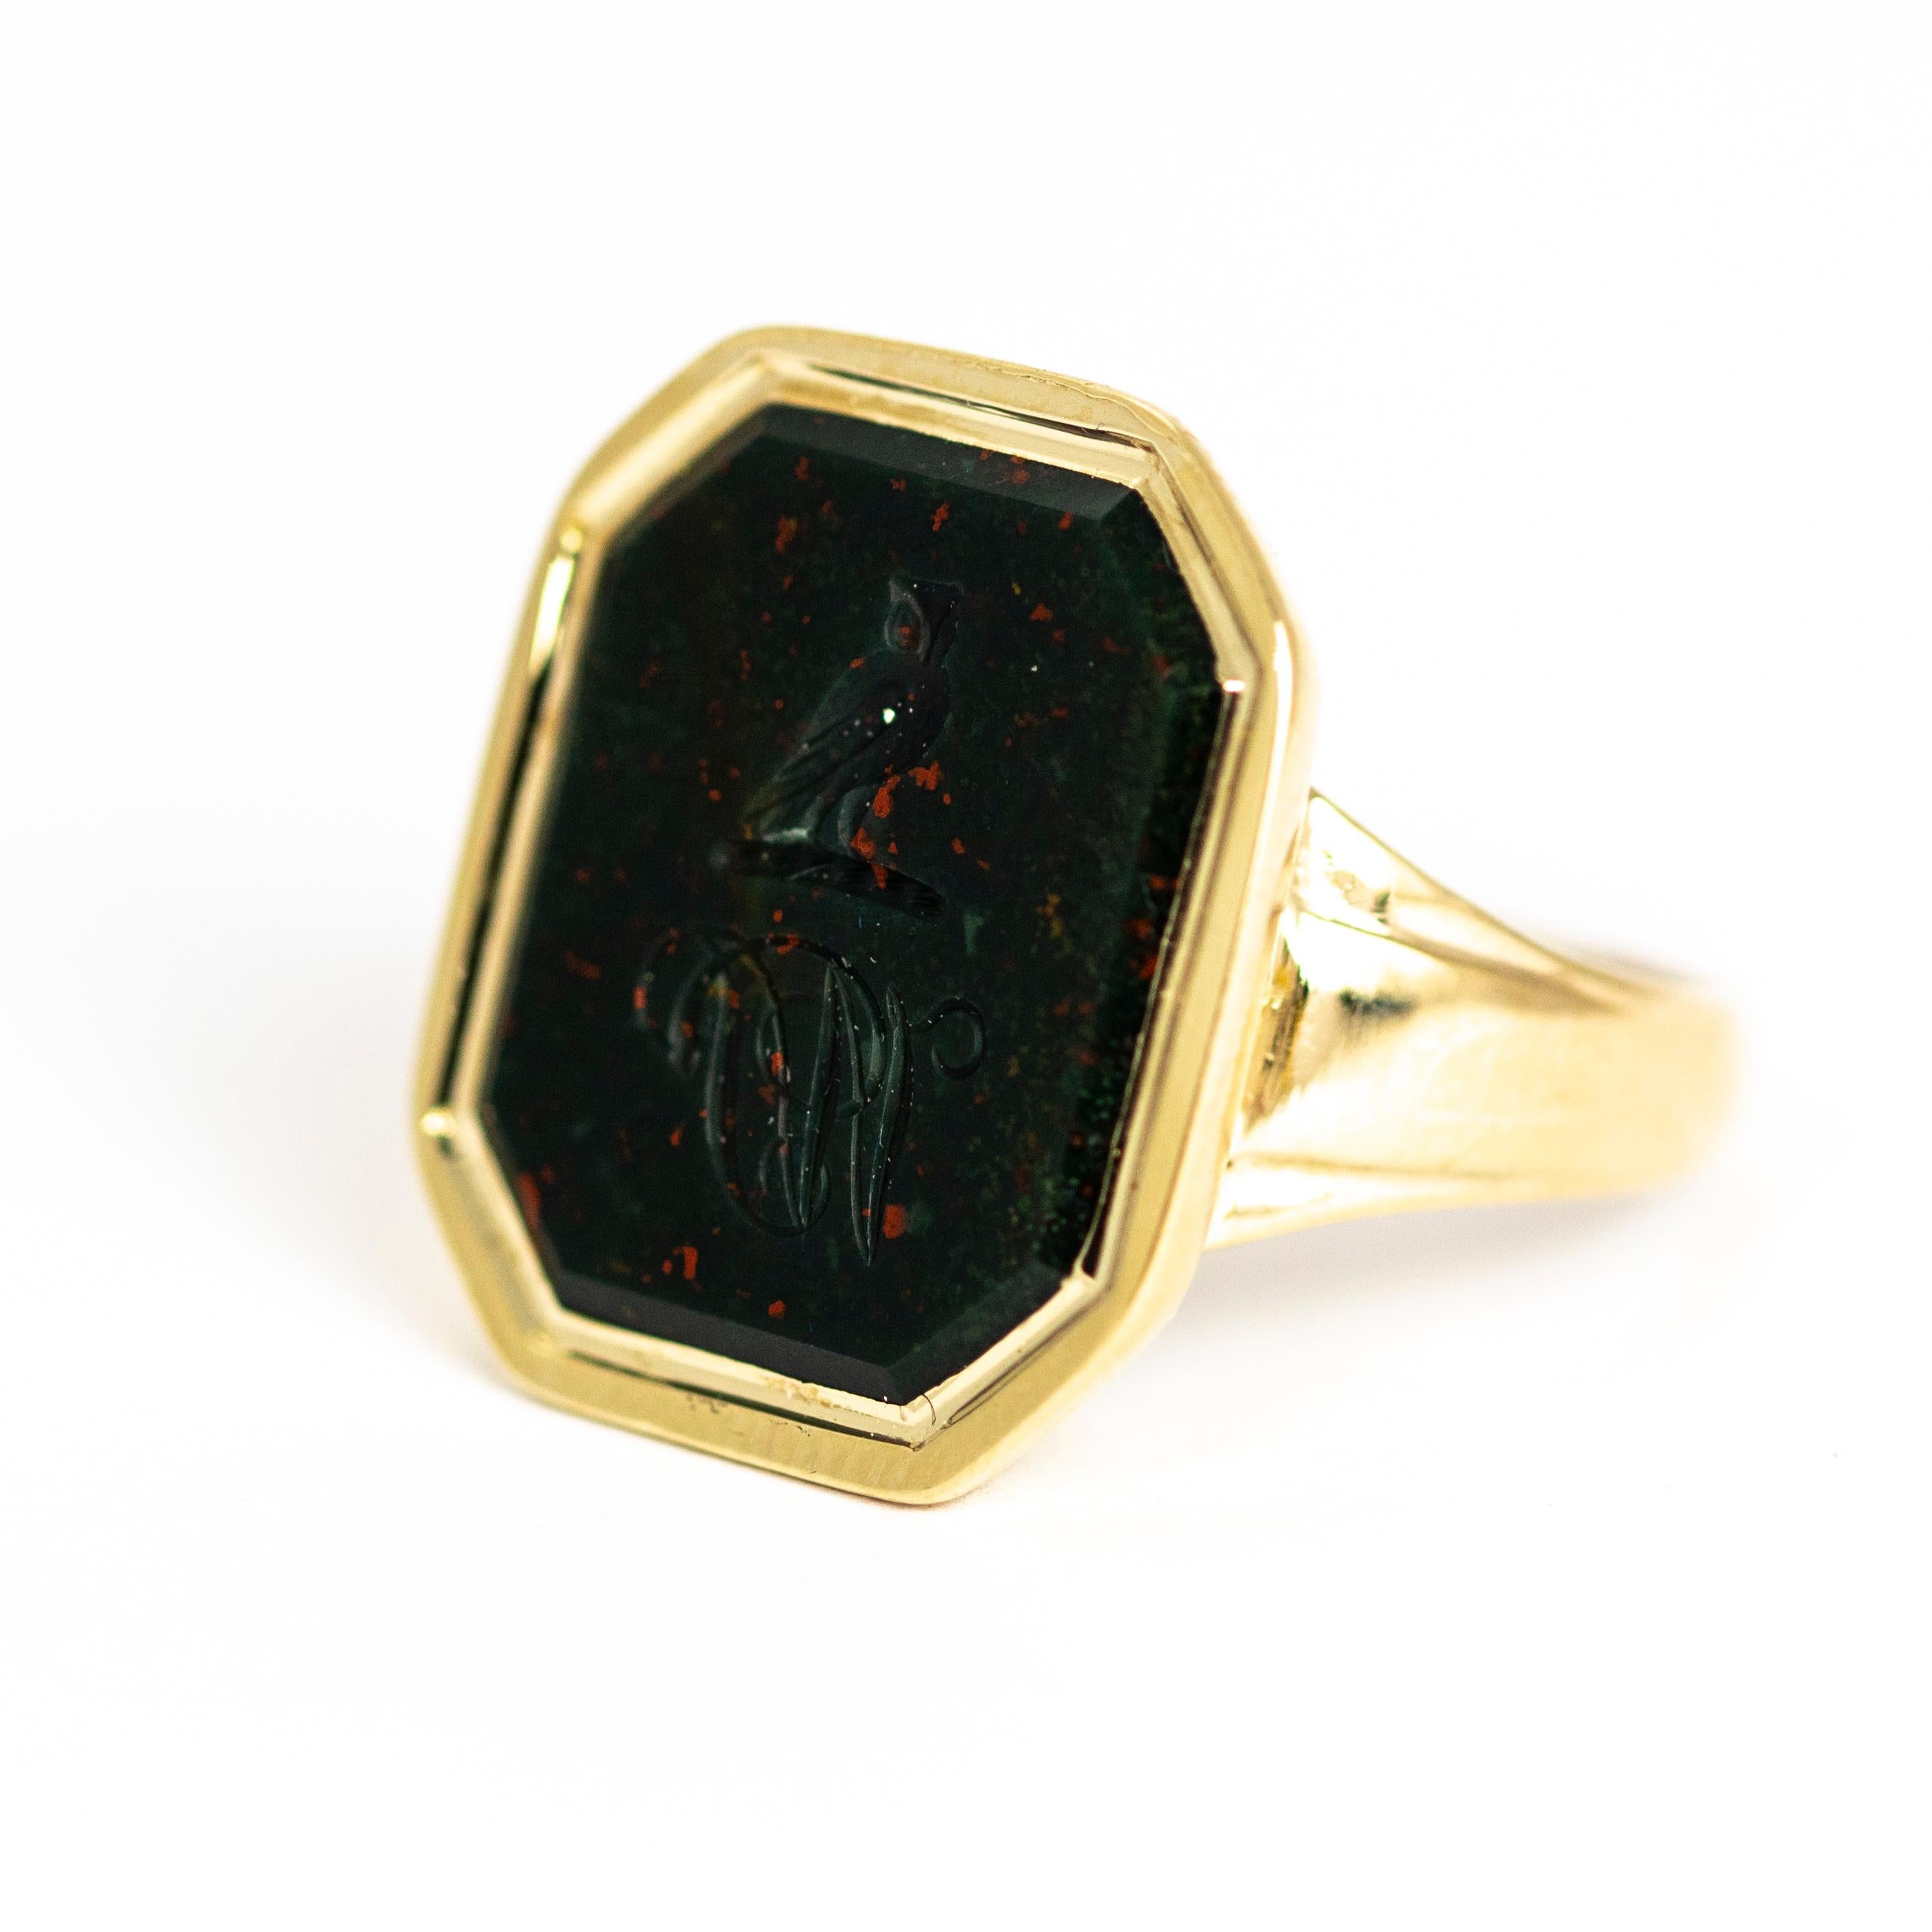 This wonderful Victorian 9ct gold ring holds a beautiful glossy bloodstone engraved with a delicate owl and initials sat upon a shiny gold platform. Made in London, England.

Ring Size: R or 8 1/2